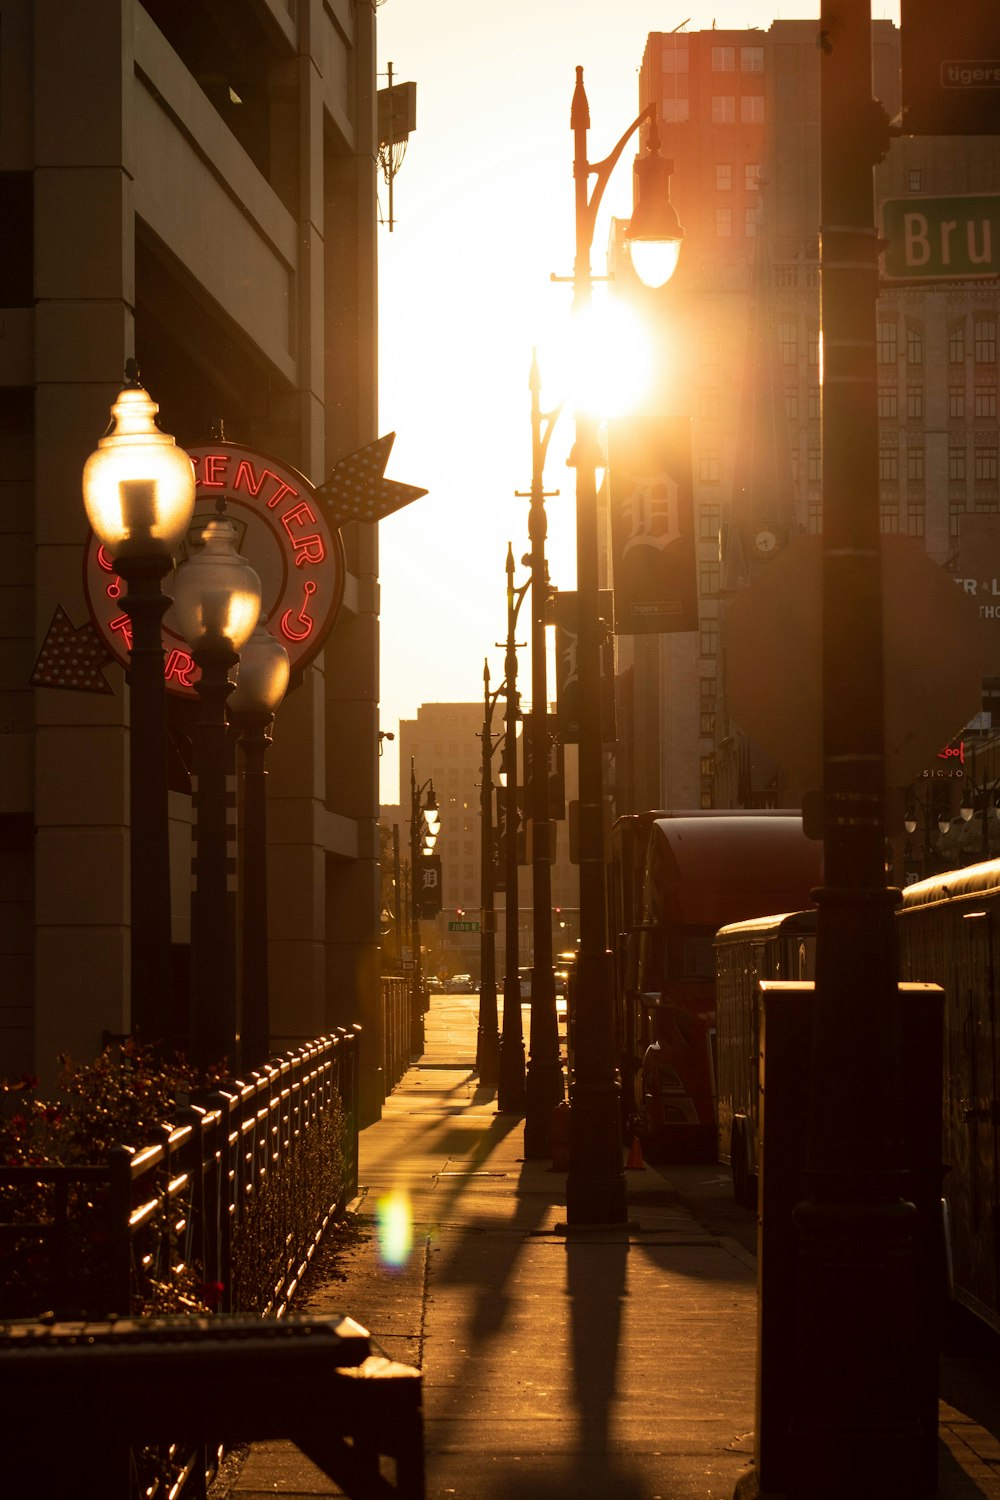 the sun is shining down on a city street